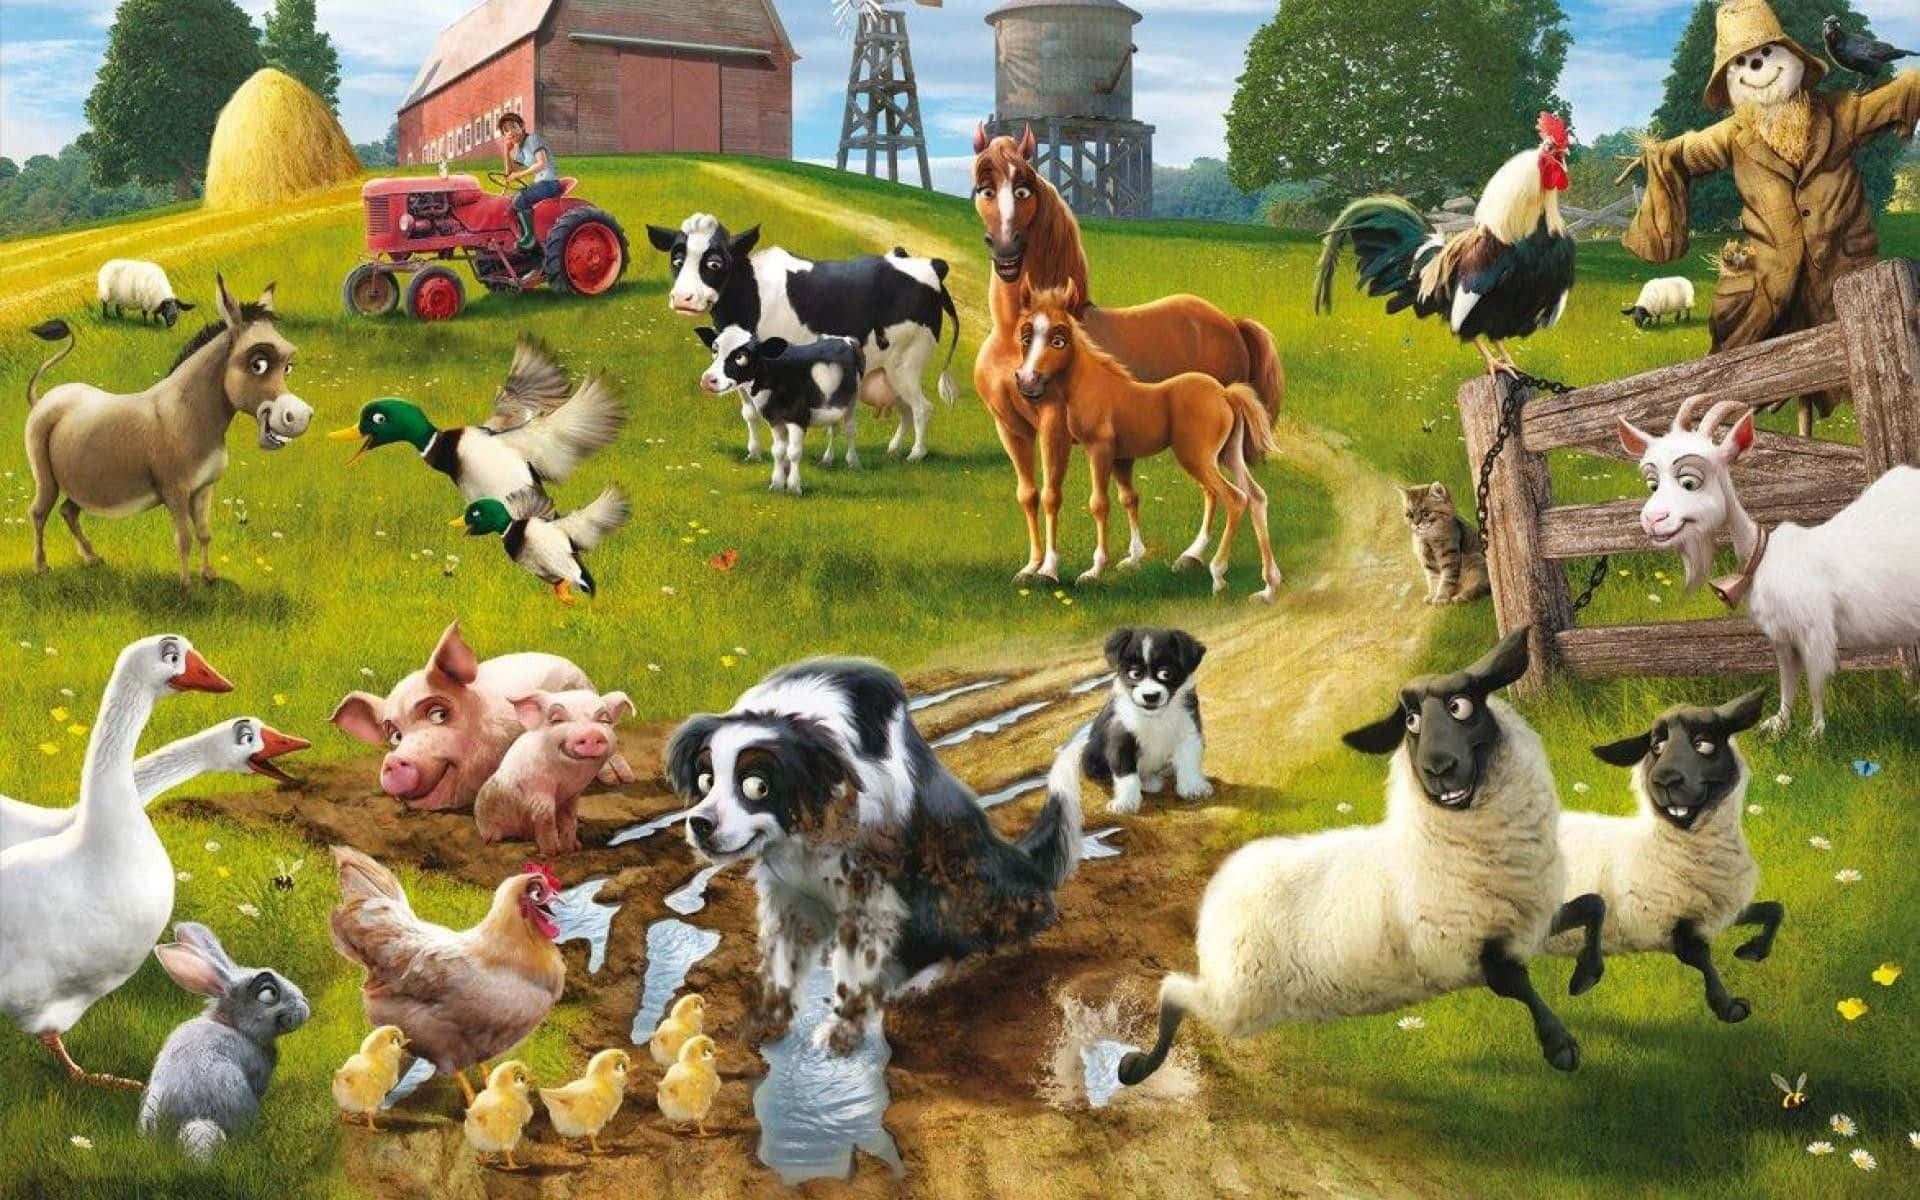 A group of diverse farm animals enjoying a sunny day together